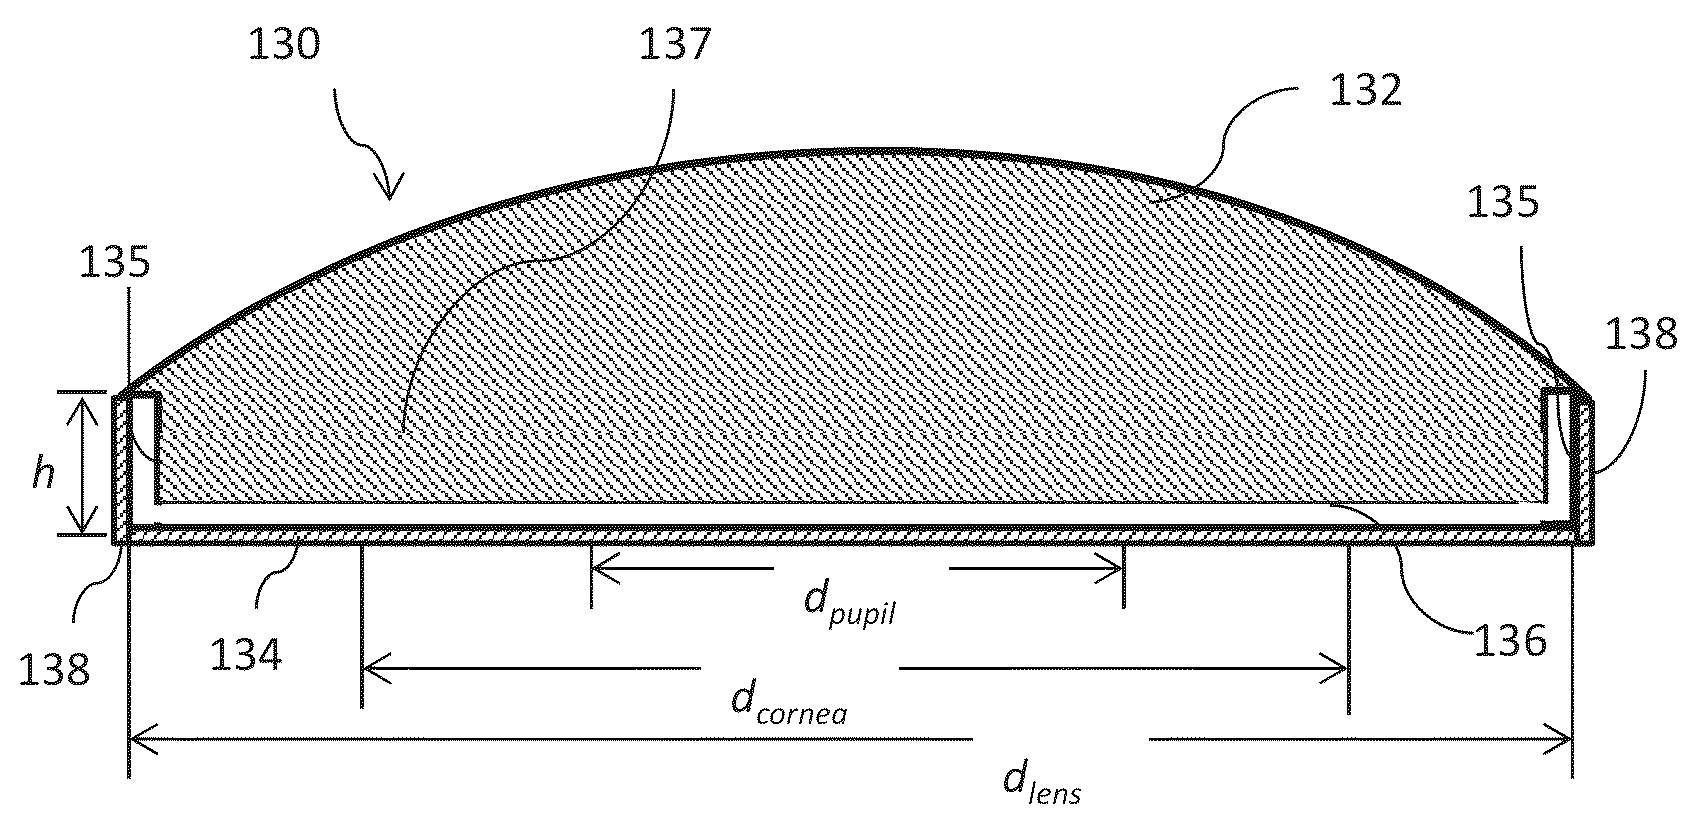 Aerated contact lens assembly